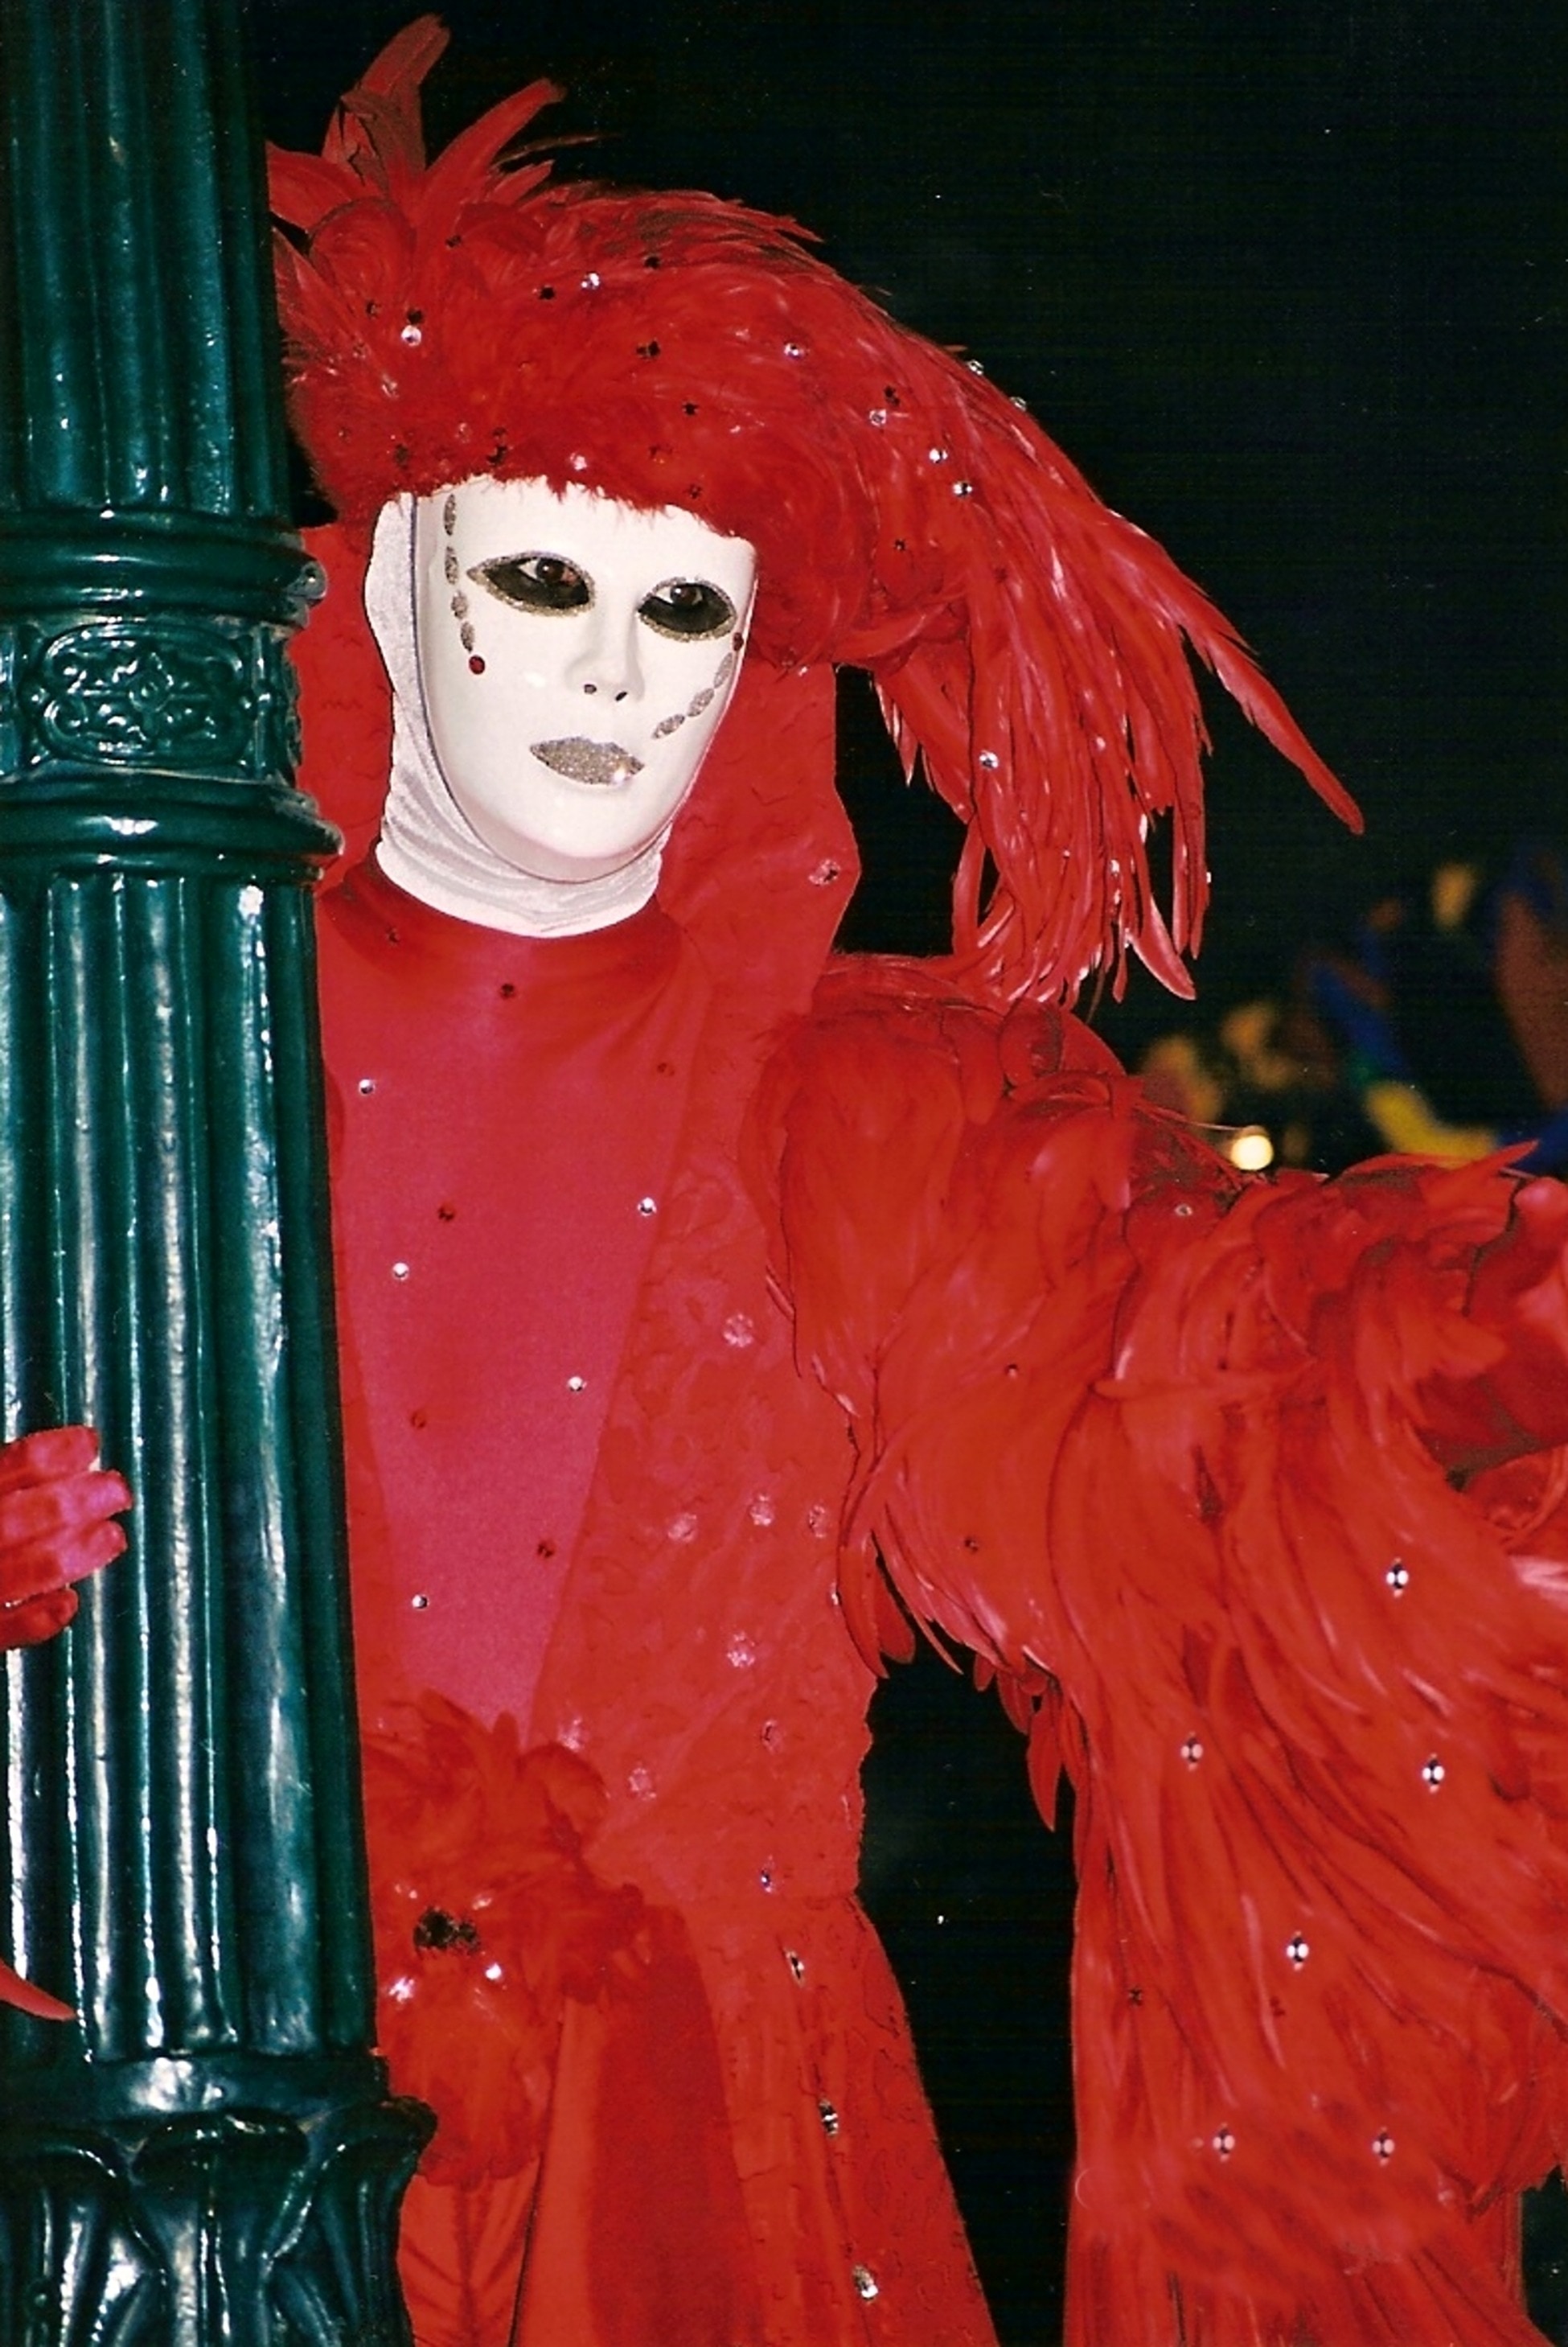 person wearing red feathered costume